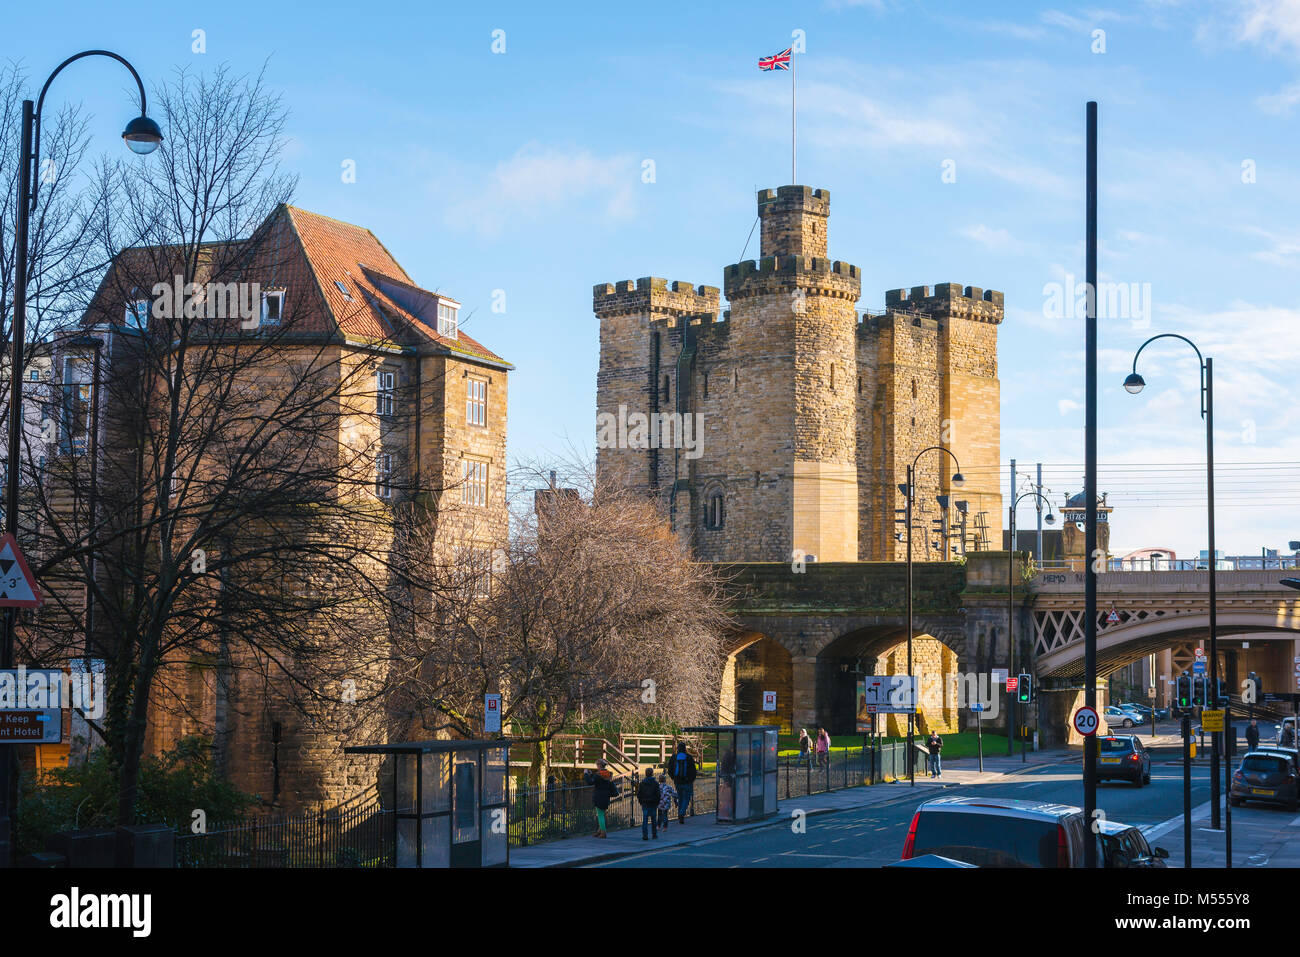 Newcastle upon Tyne UK, view along St Nicholas Street towards the early medieval Castle with the Black Gate Museum sited on the left, Tyne And Wear Stock Photo